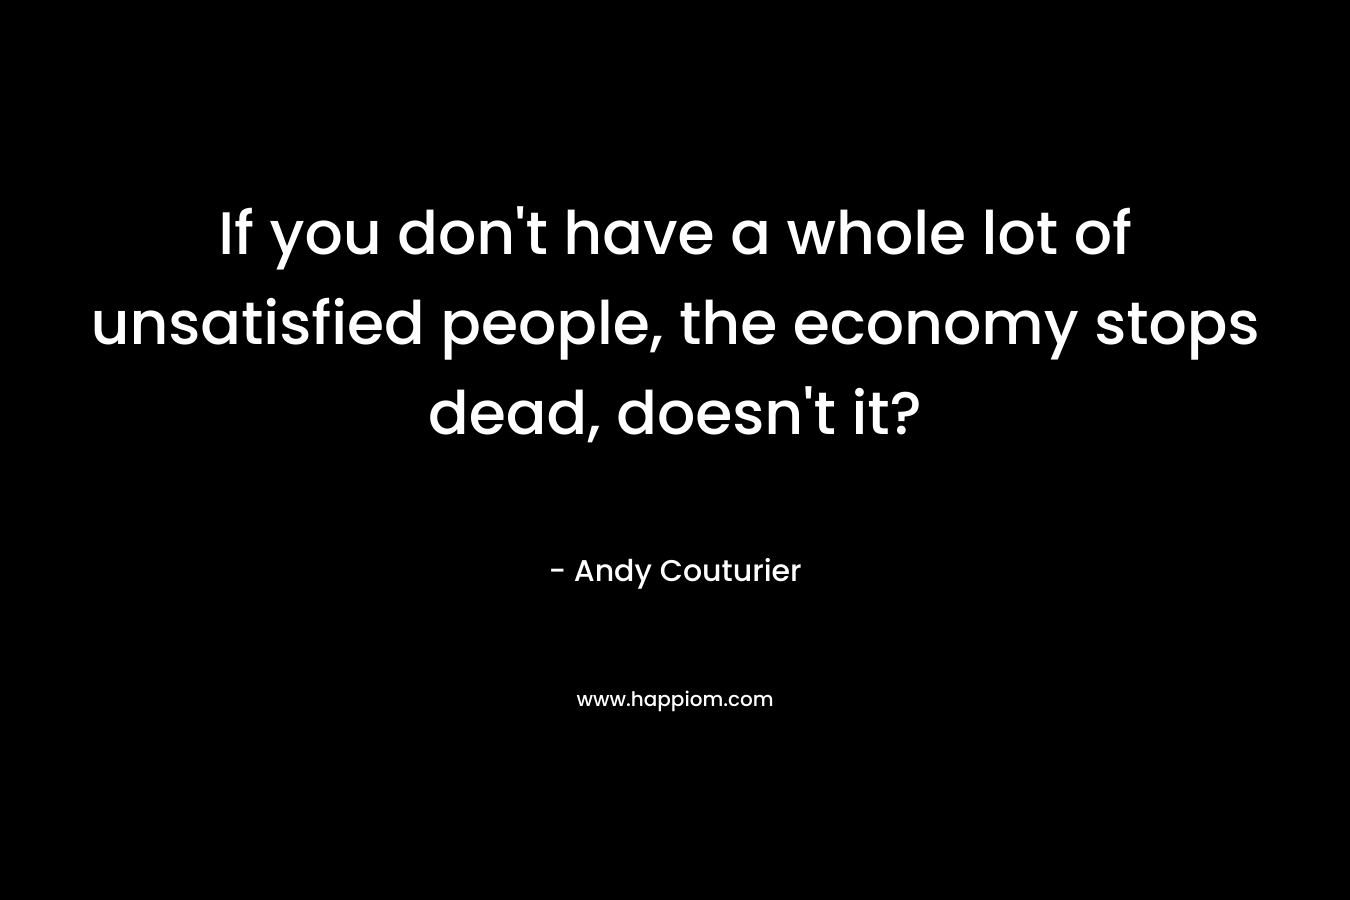 If you don’t have a whole lot of unsatisfied people, the economy stops dead, doesn’t it? – Andy Couturier